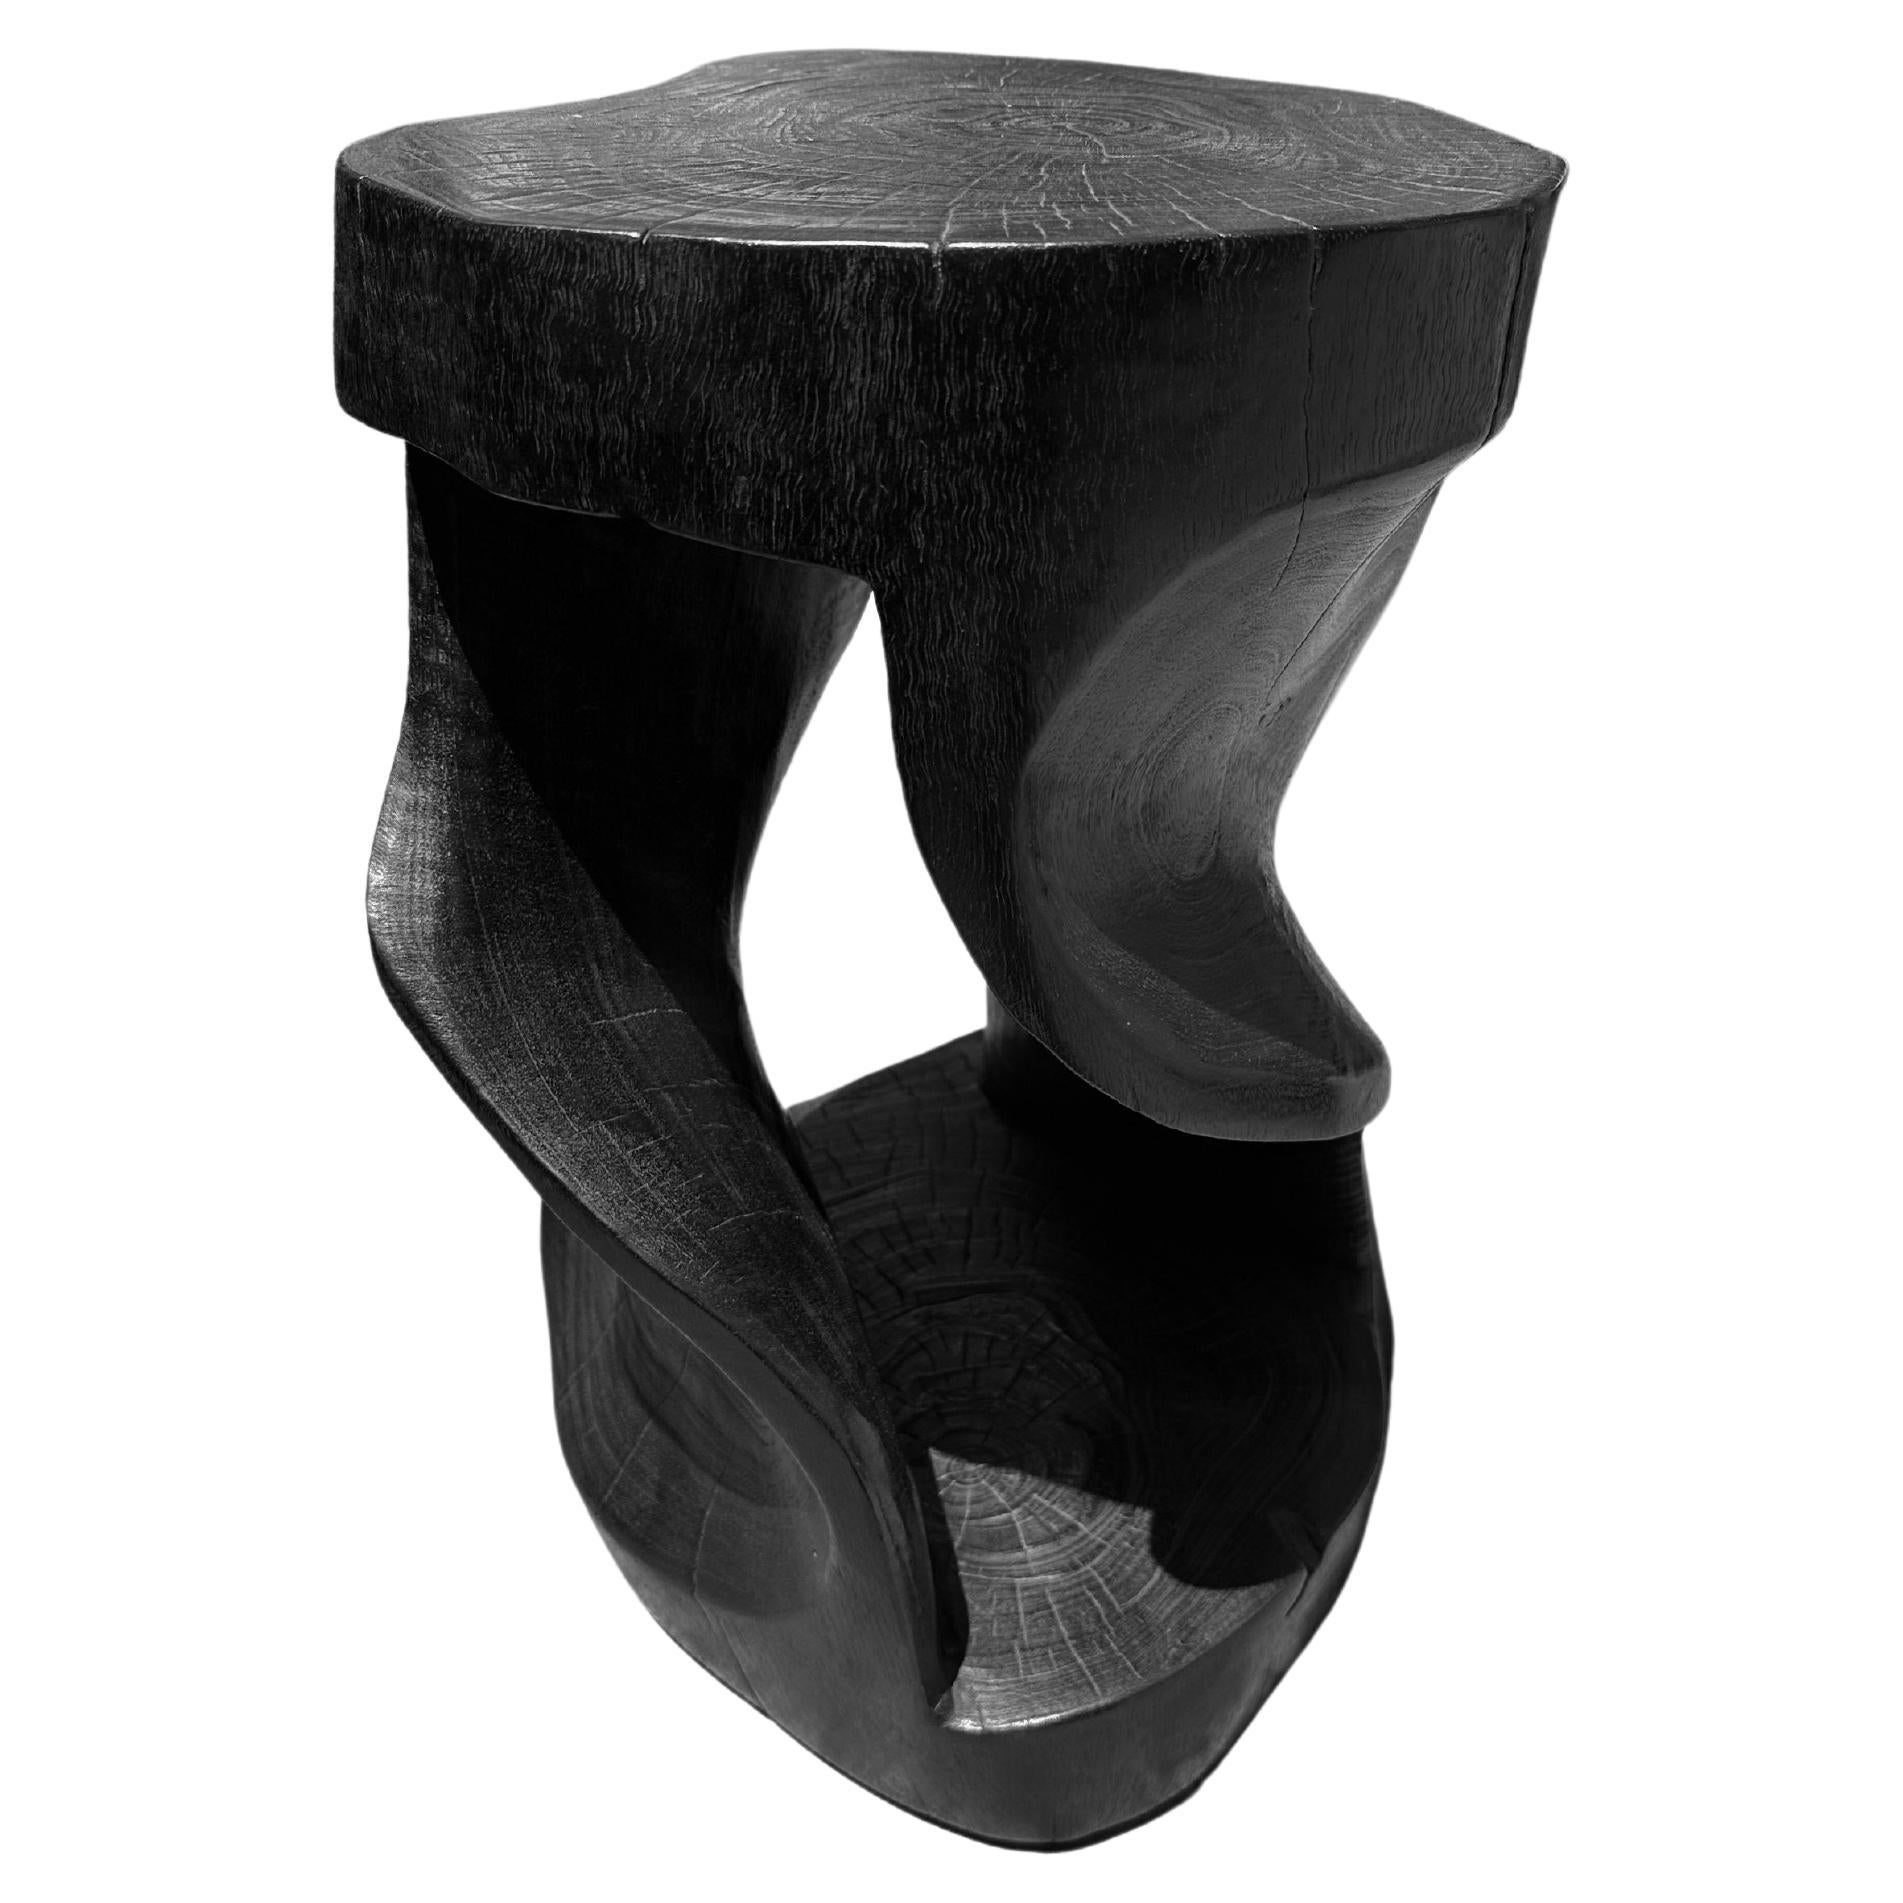 Sculptural Stool / Side Table Carved from Solid Mango Wood Modern Organic